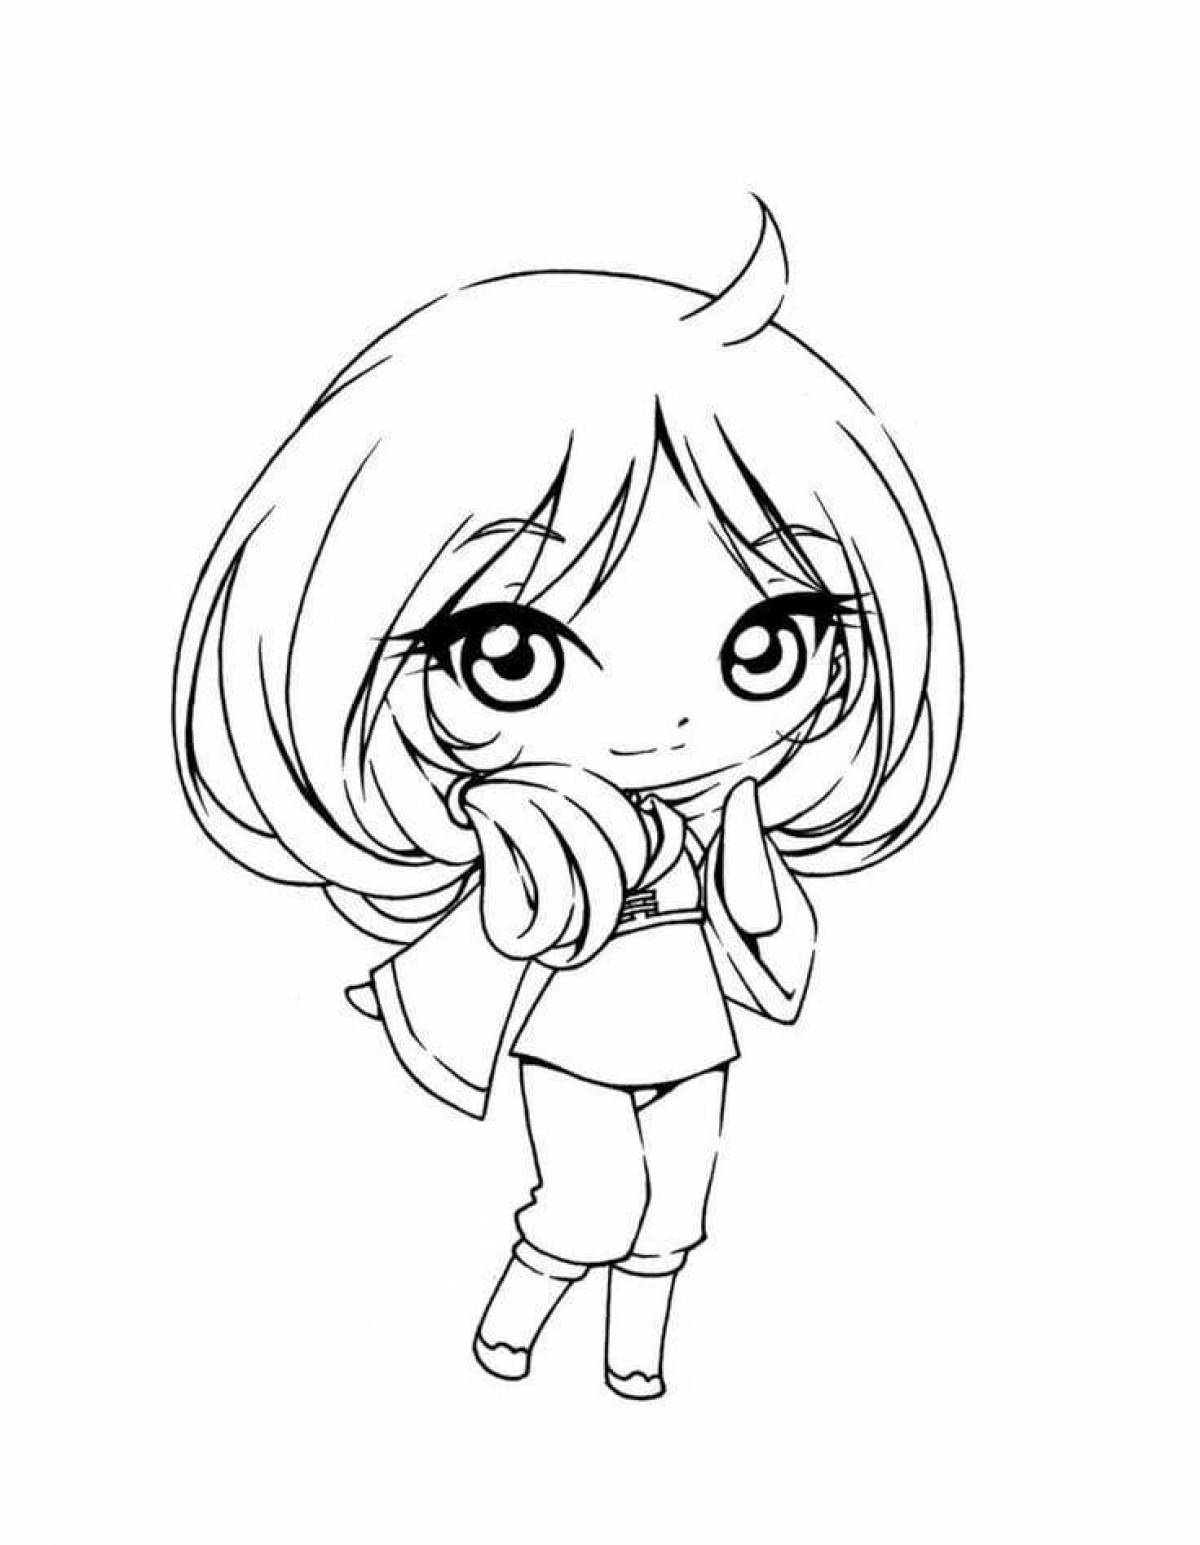 Awesome chibi anime coloring page